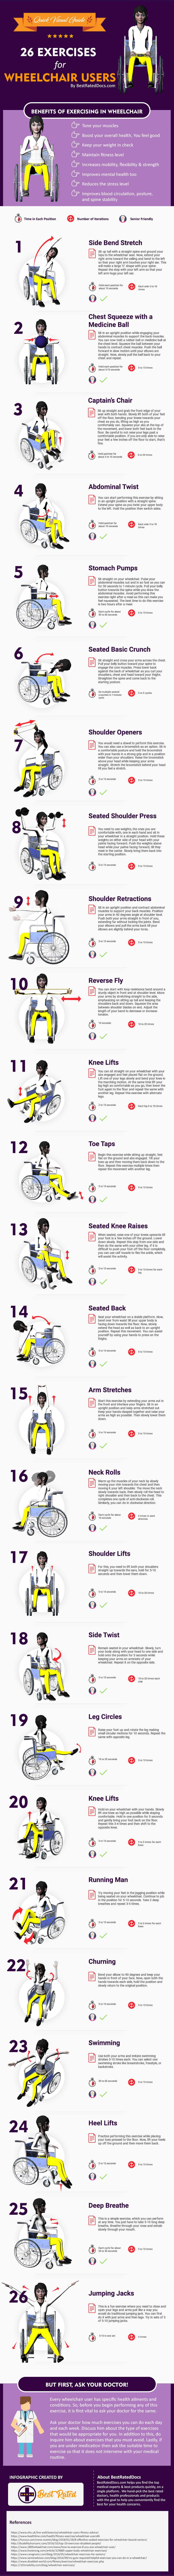 26 Exercises for Wheelchair Users #Infographic